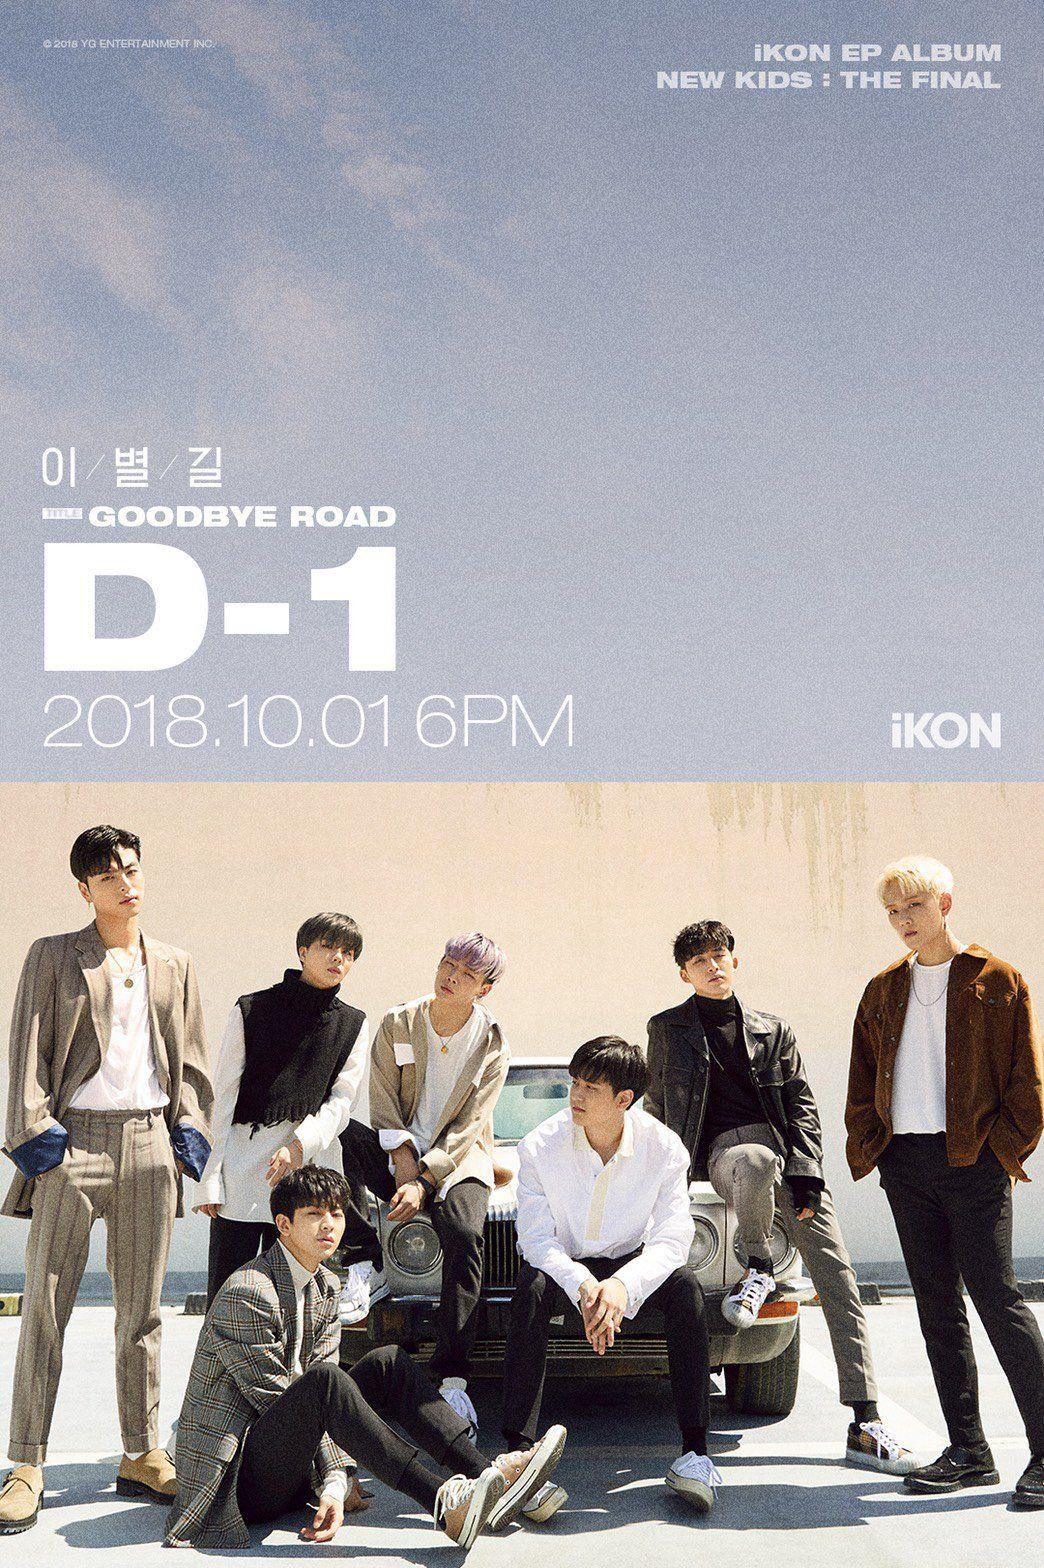 Update: IKON Unveils New Teaser Poster To Mark D Day Of New Release